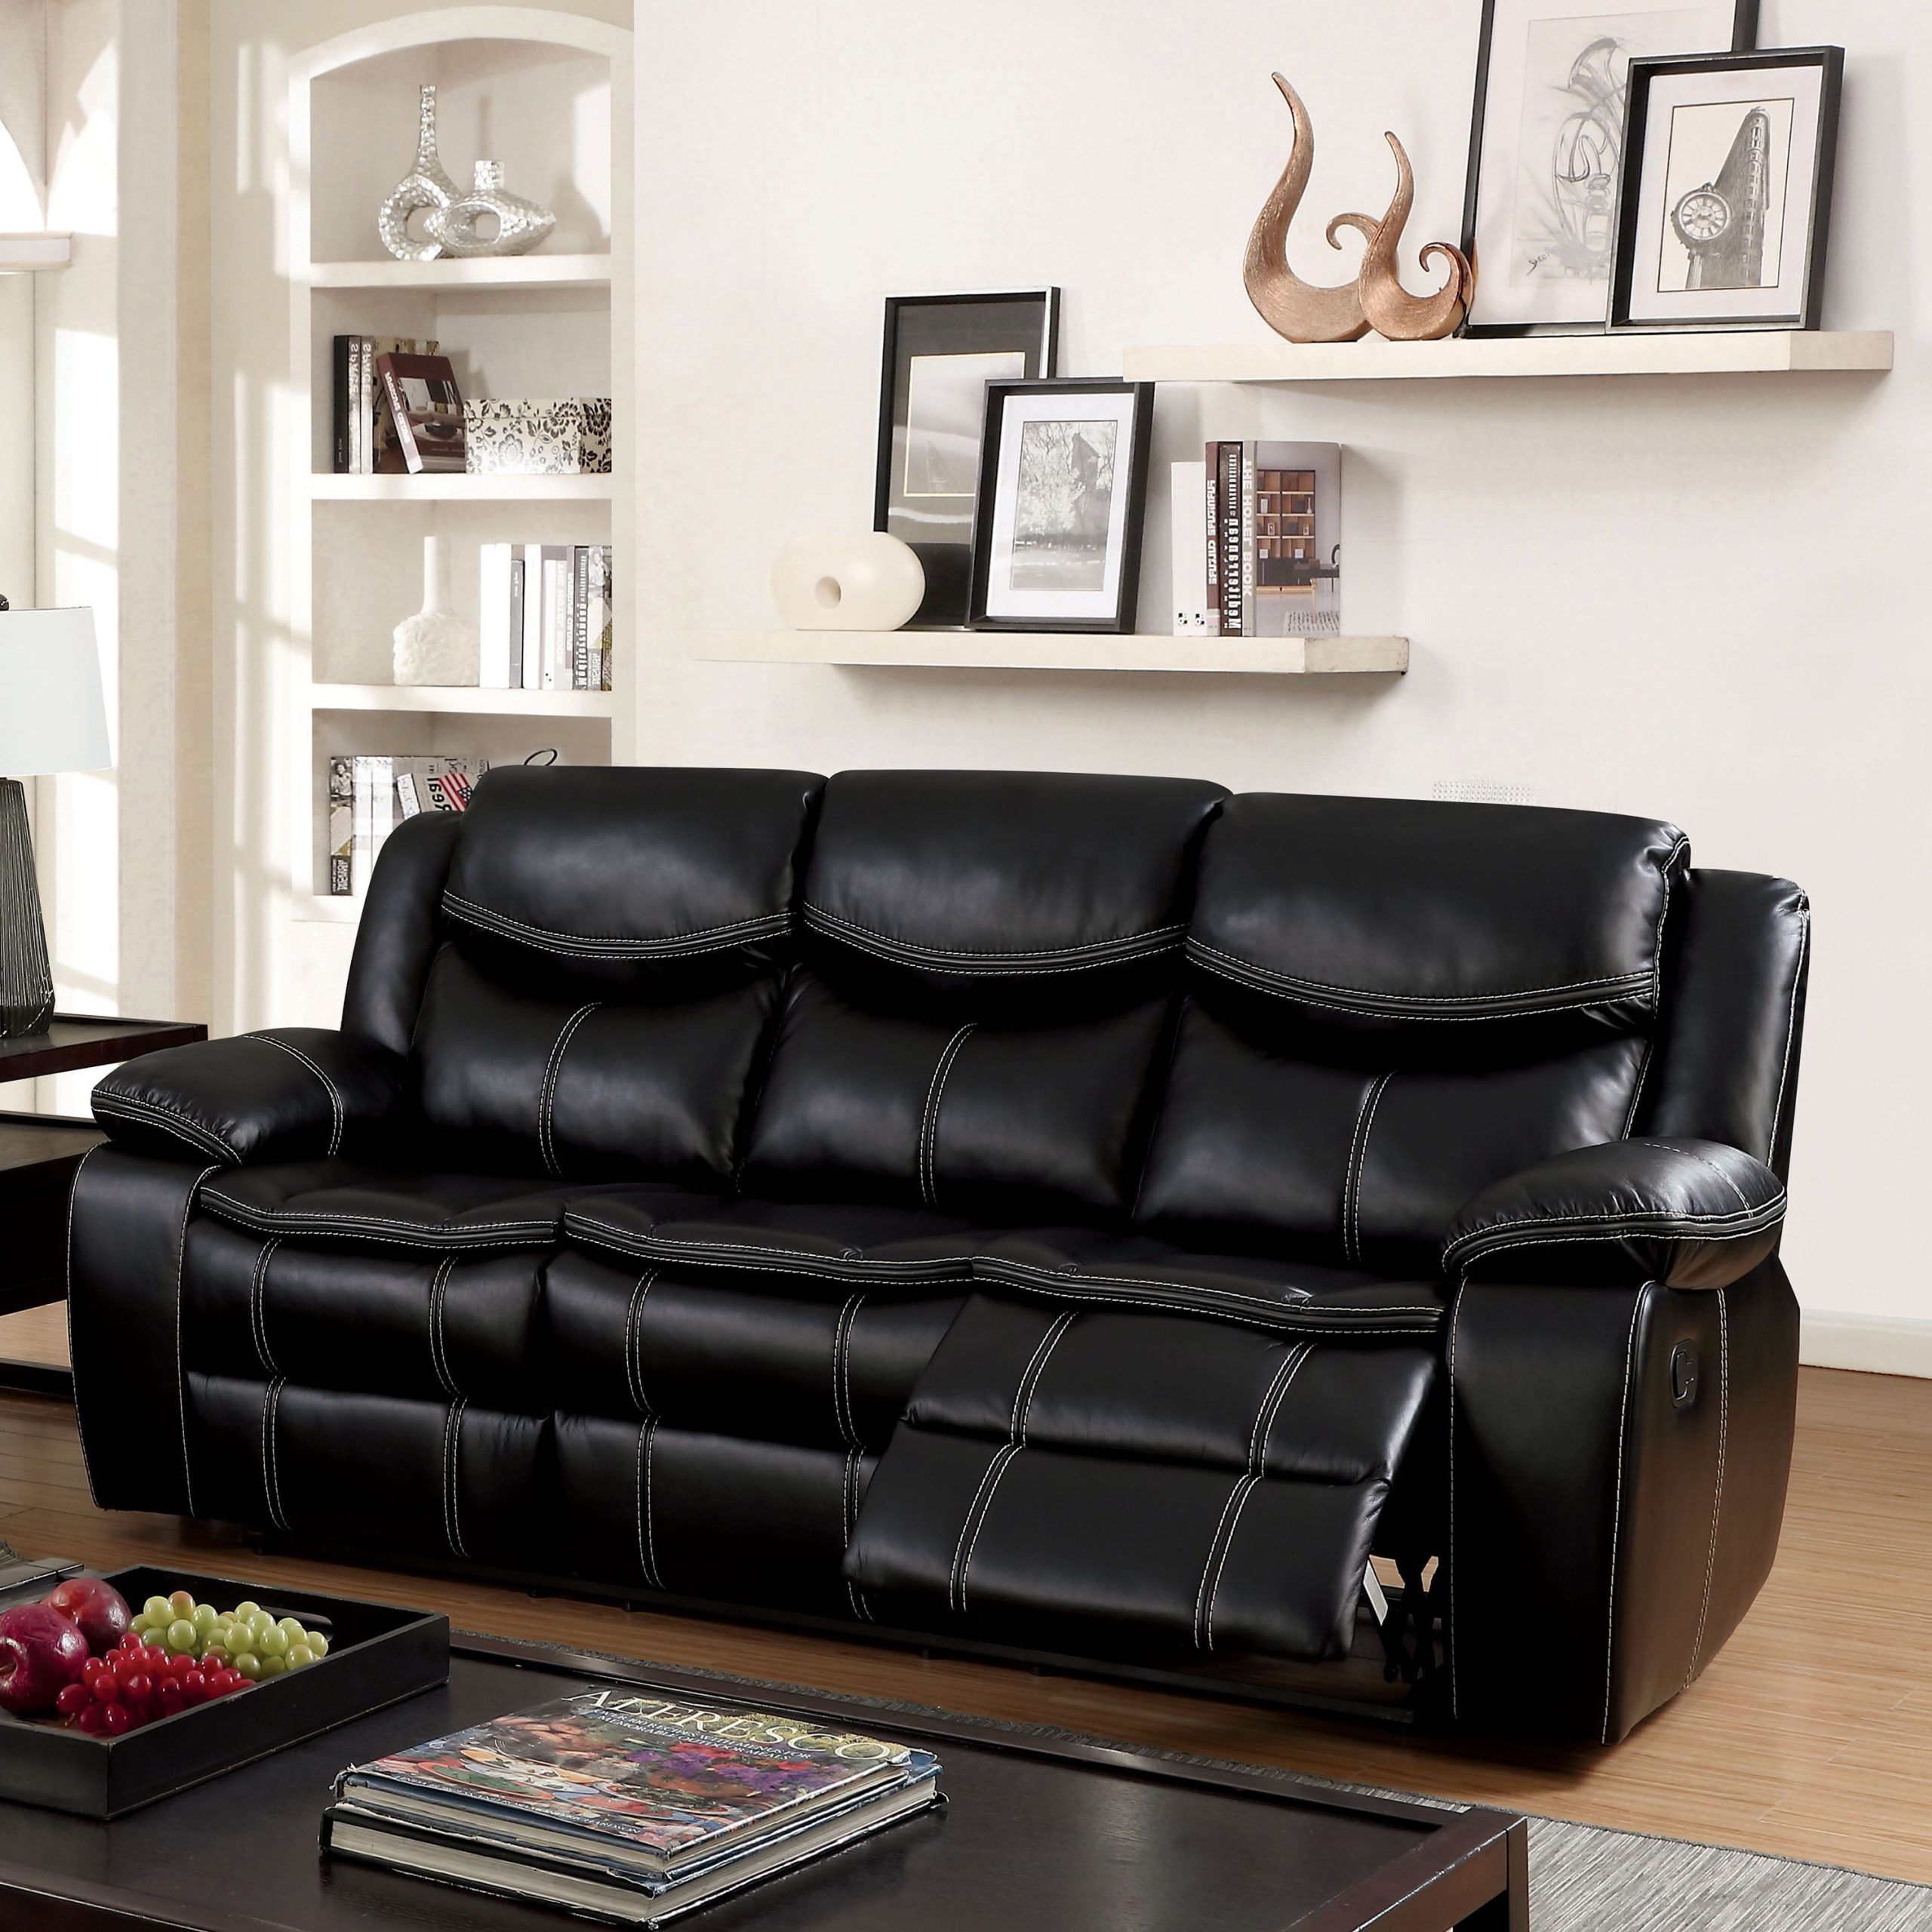 Furniture Of America Transitional Faux Leather Judson Reclining Sofa Pertaining To Sofas In Black (View 17 of 20)